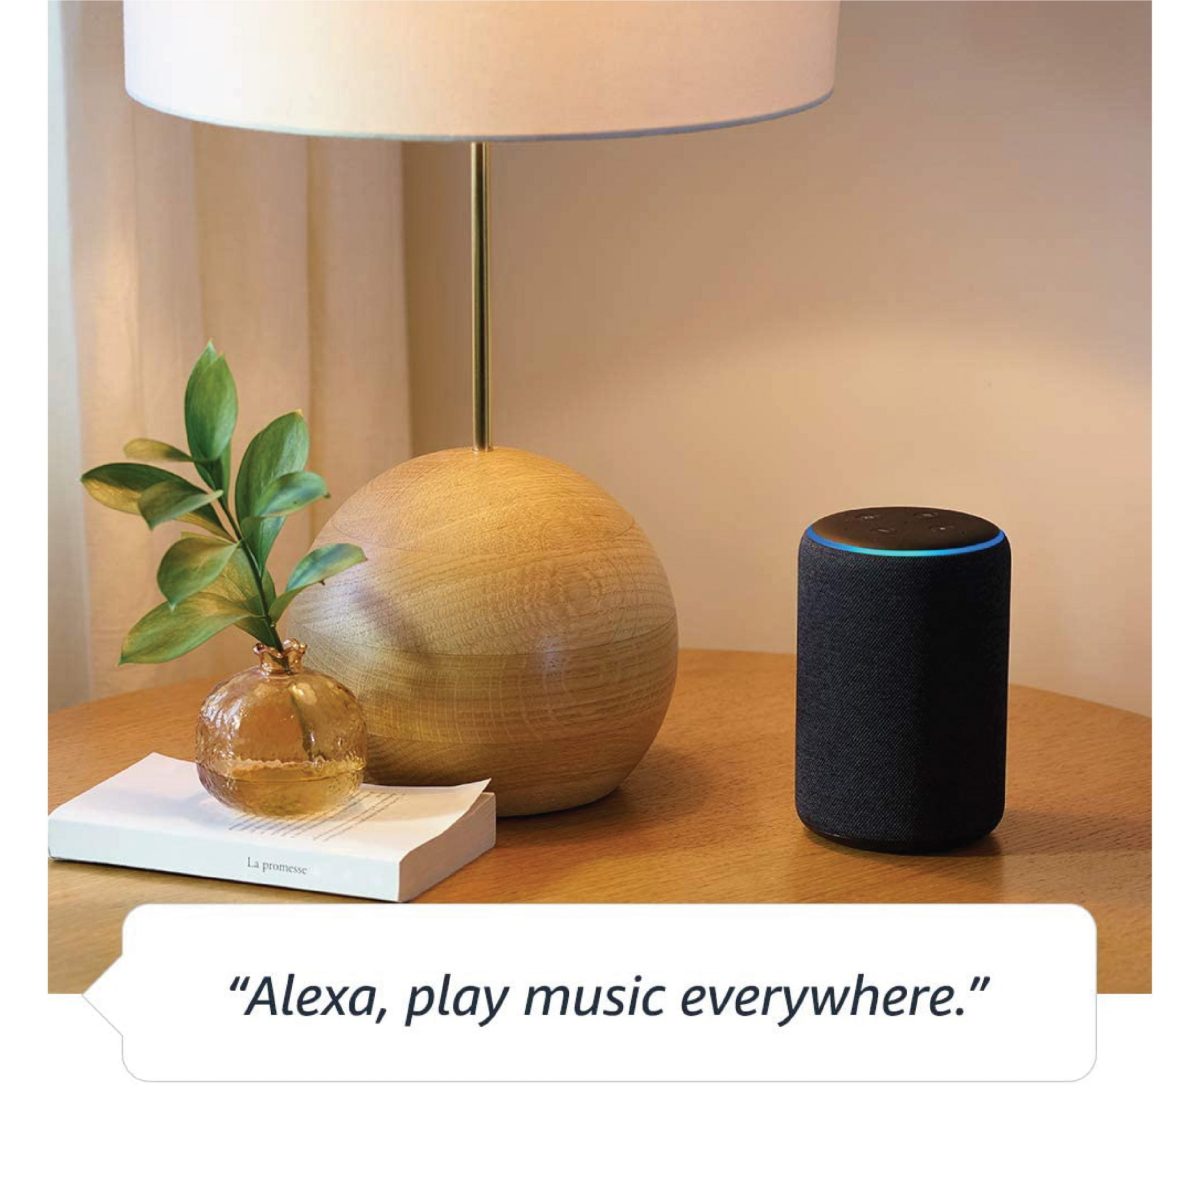 Adasd2X 03 Scaled Amazon Echo Plus Connects To Alexa And Can Simply Set Up And Voice-Control Compatible Smart Home Devices. Play Music Powered By Dolby From Your Favourite Streaming Services. Just Ask Alexa To Play Music, Read The News, Check Weather Forecasts, Set Alarms And Timers, Control Smart Home Devices, Call Echo Devices, And More. Alexa Is Always Getting Smarter And Adding New Features And Skills. &Lt;Ul&Gt; &Lt;Li&Gt;1 Internal Speaker.&Lt;/Li&Gt; &Lt;Li&Gt;3.5Mm Aux In.&Lt;/Li&Gt; &Lt;Li&Gt;2 Amplifier Channels.&Lt;/Li&Gt; &Lt;Li&Gt;Frequency 70Hz-20000Hz.&Lt;/Li&Gt; &Lt;Li&Gt;Size H14.85, W9.92, D9.92Cm.&Lt;/Li&Gt; &Lt;/Ul&Gt; [Video Width=&Quot;1024&Quot; Height=&Quot;576&Quot; Mp4=&Quot;Https://Lablaab.com/Wp-Content/Uploads/2020/04/9734Eb70-3880-47D1-9F7F-7958Db9F4054.Mp4&Quot;][/Video] Echo Plus Echo Plus (2Nd Gen) - Premium Sound With Built-In Smart Home Hub - Heather Gray